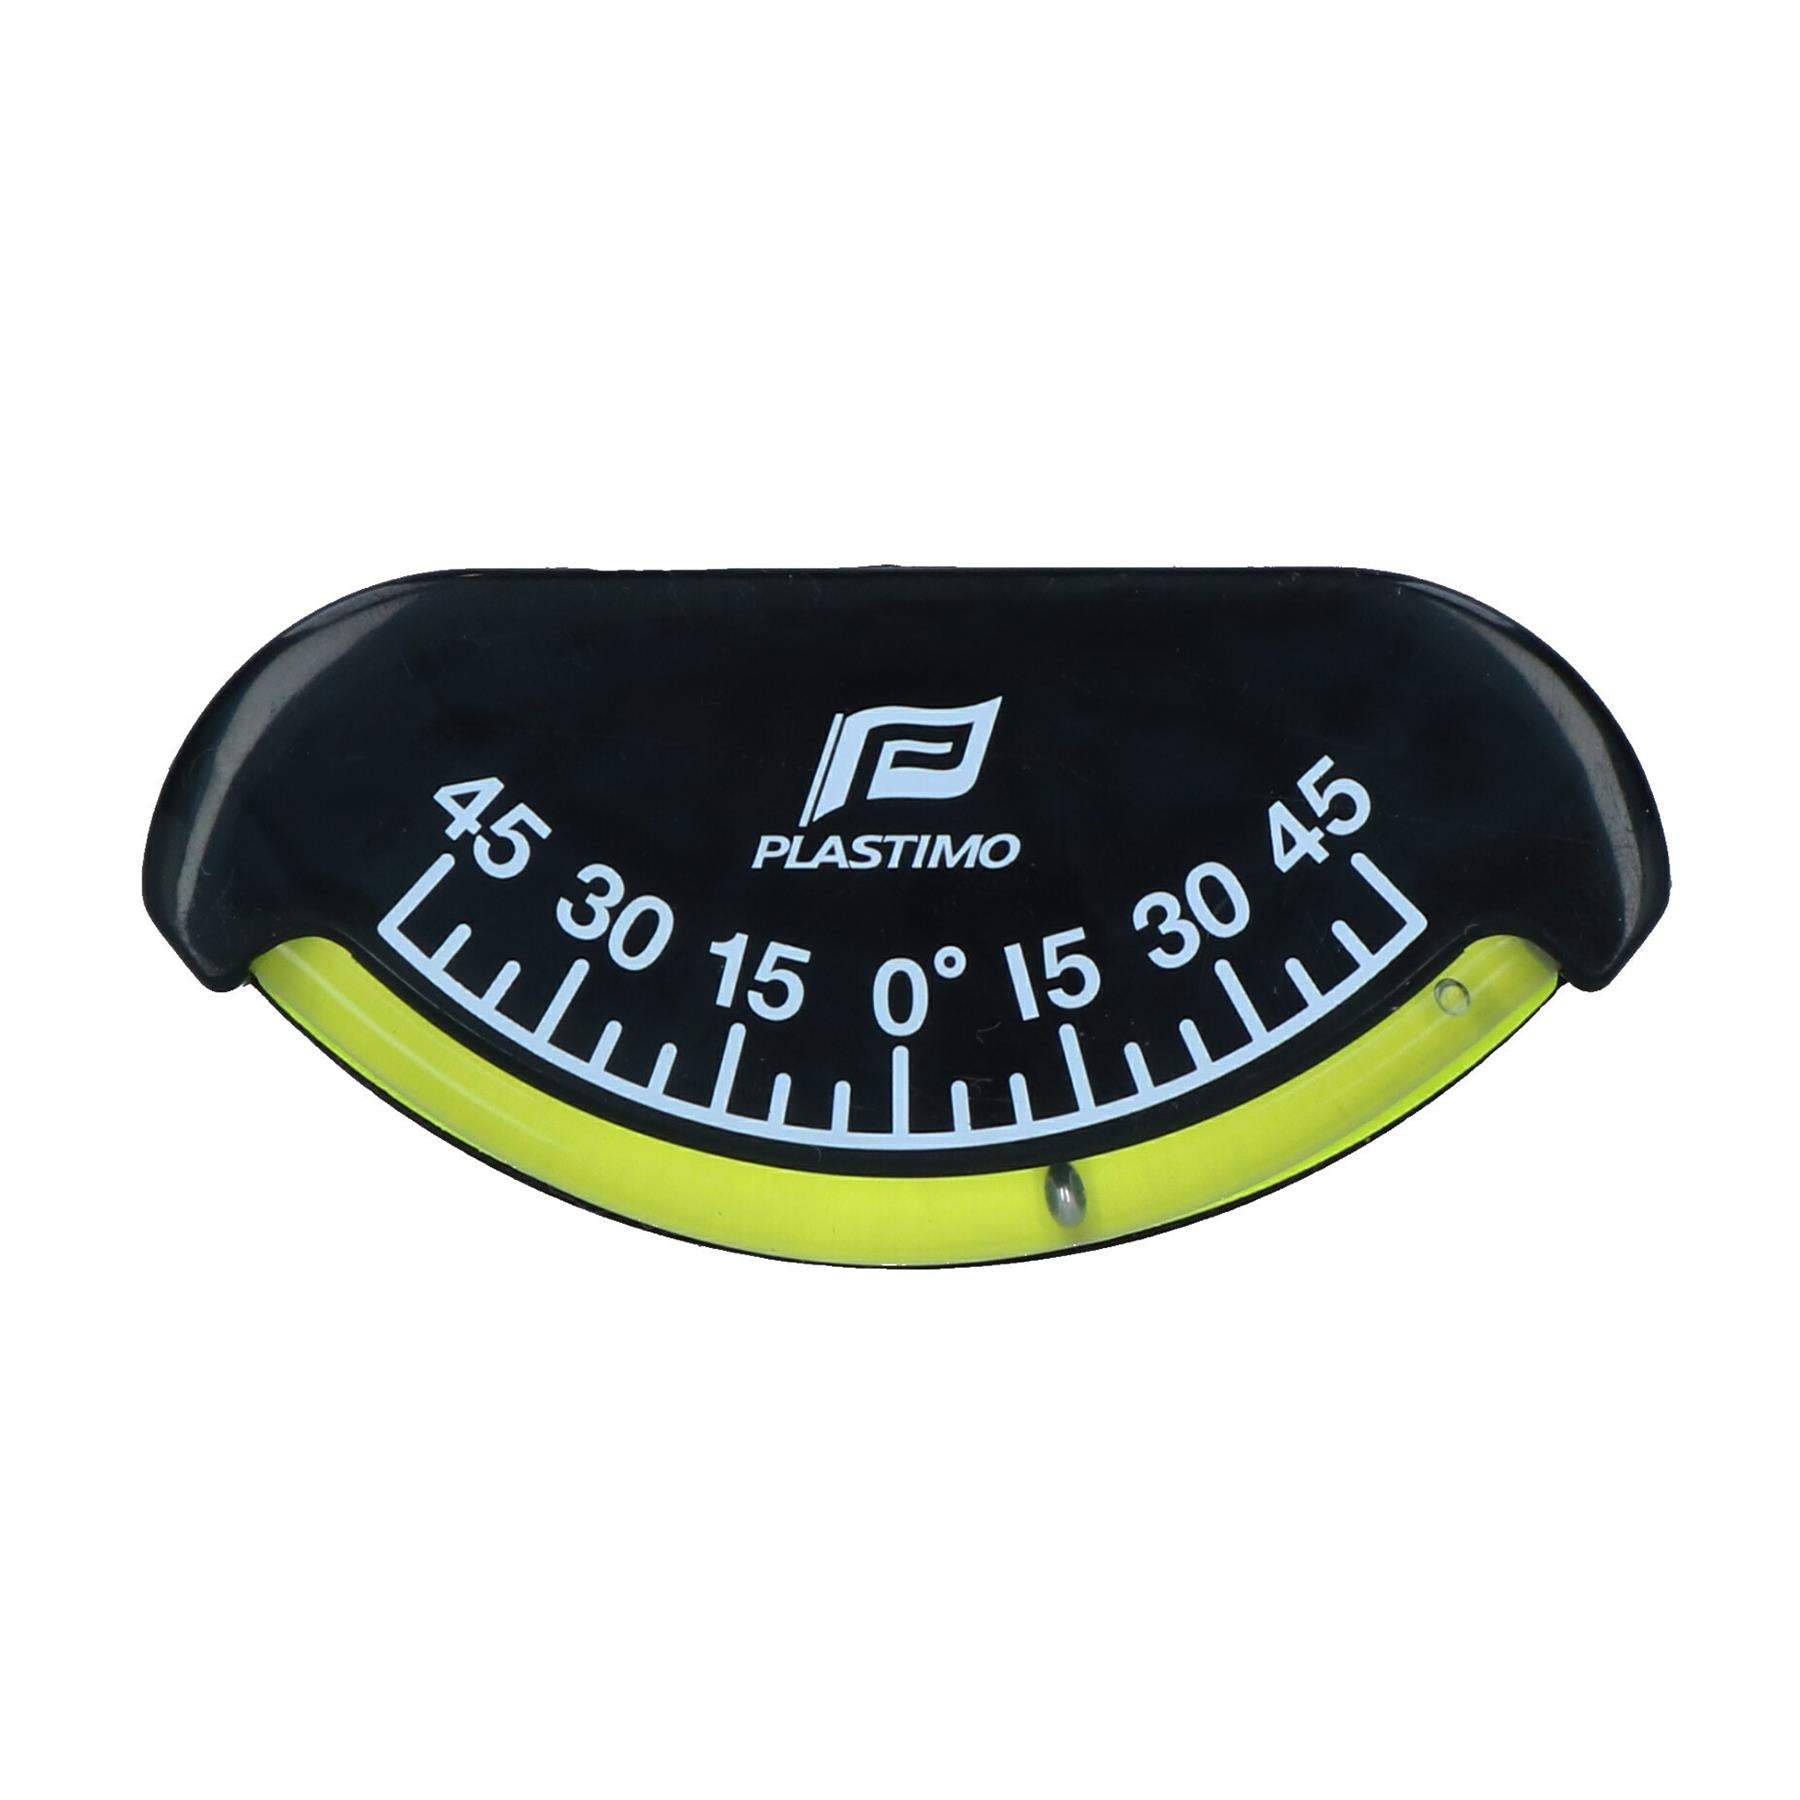 Damped Inclinometer Clinometer Accurate Level 0-45 Degrees Sailing